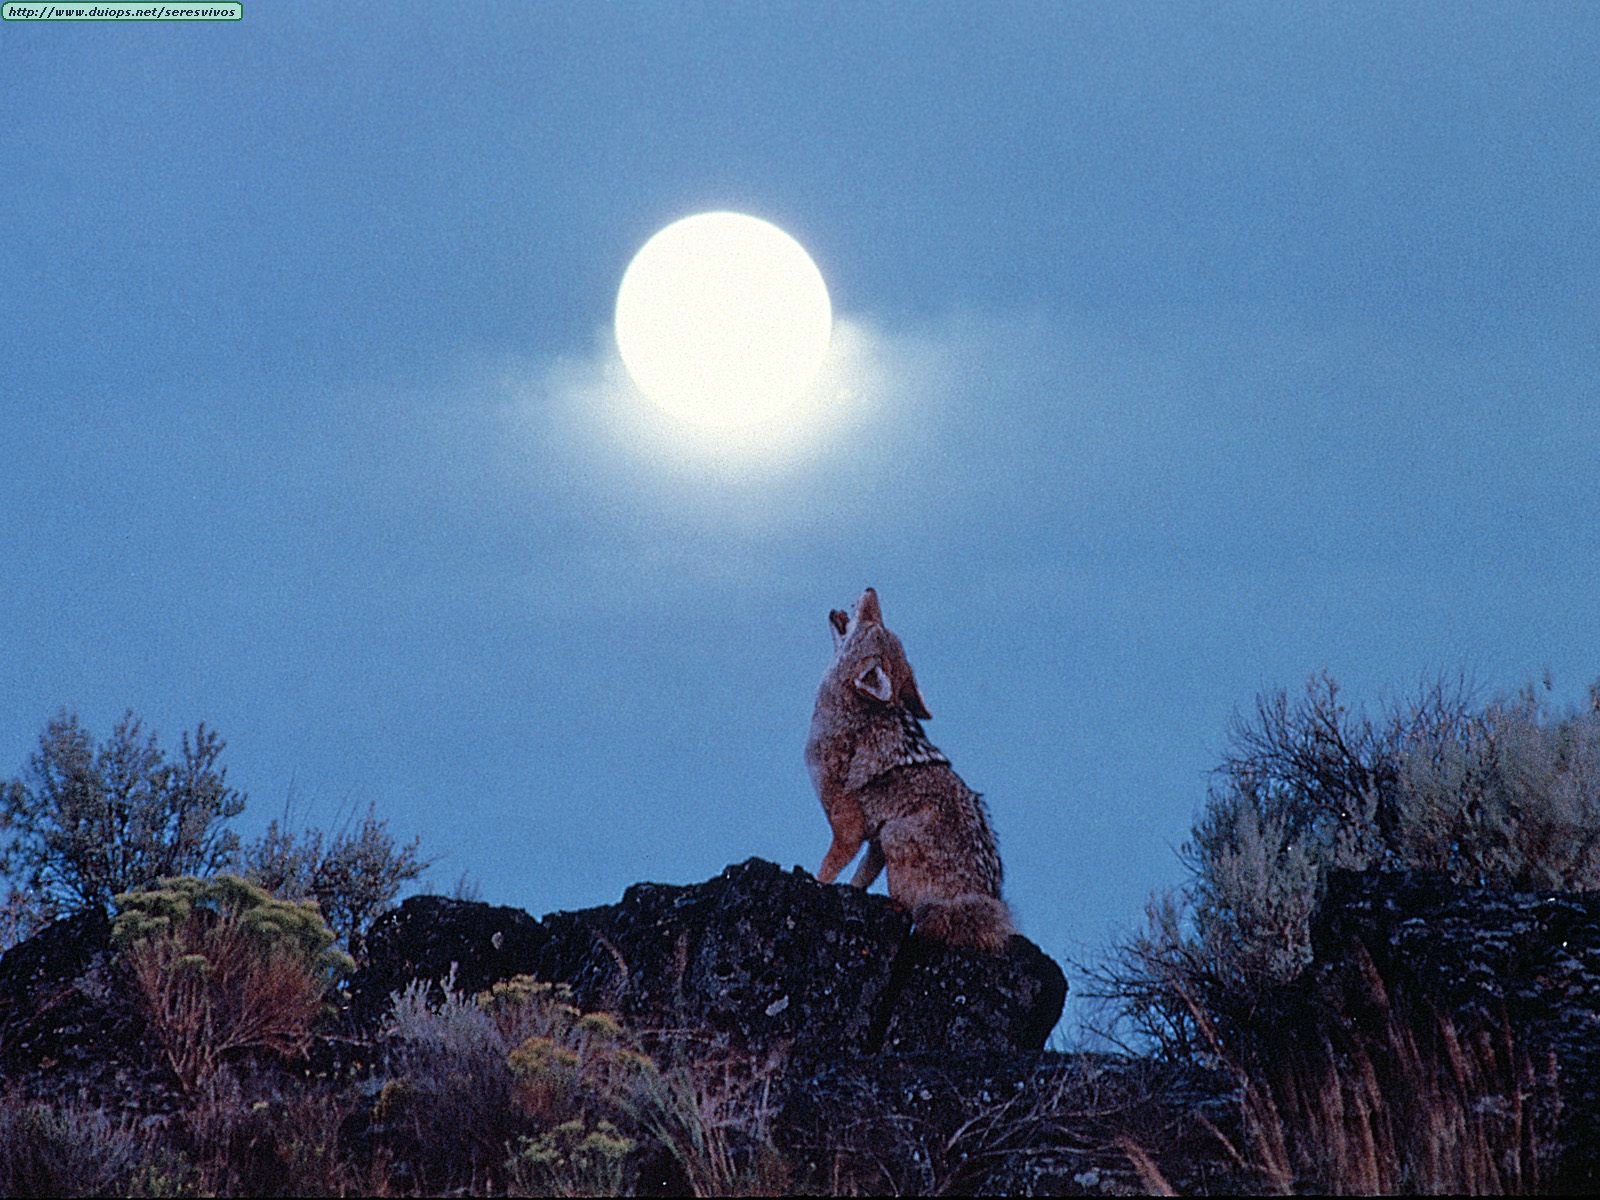 http://www.duiops.net/seresvivos/galeria/coyotes/Howling%20Coyote.jpg